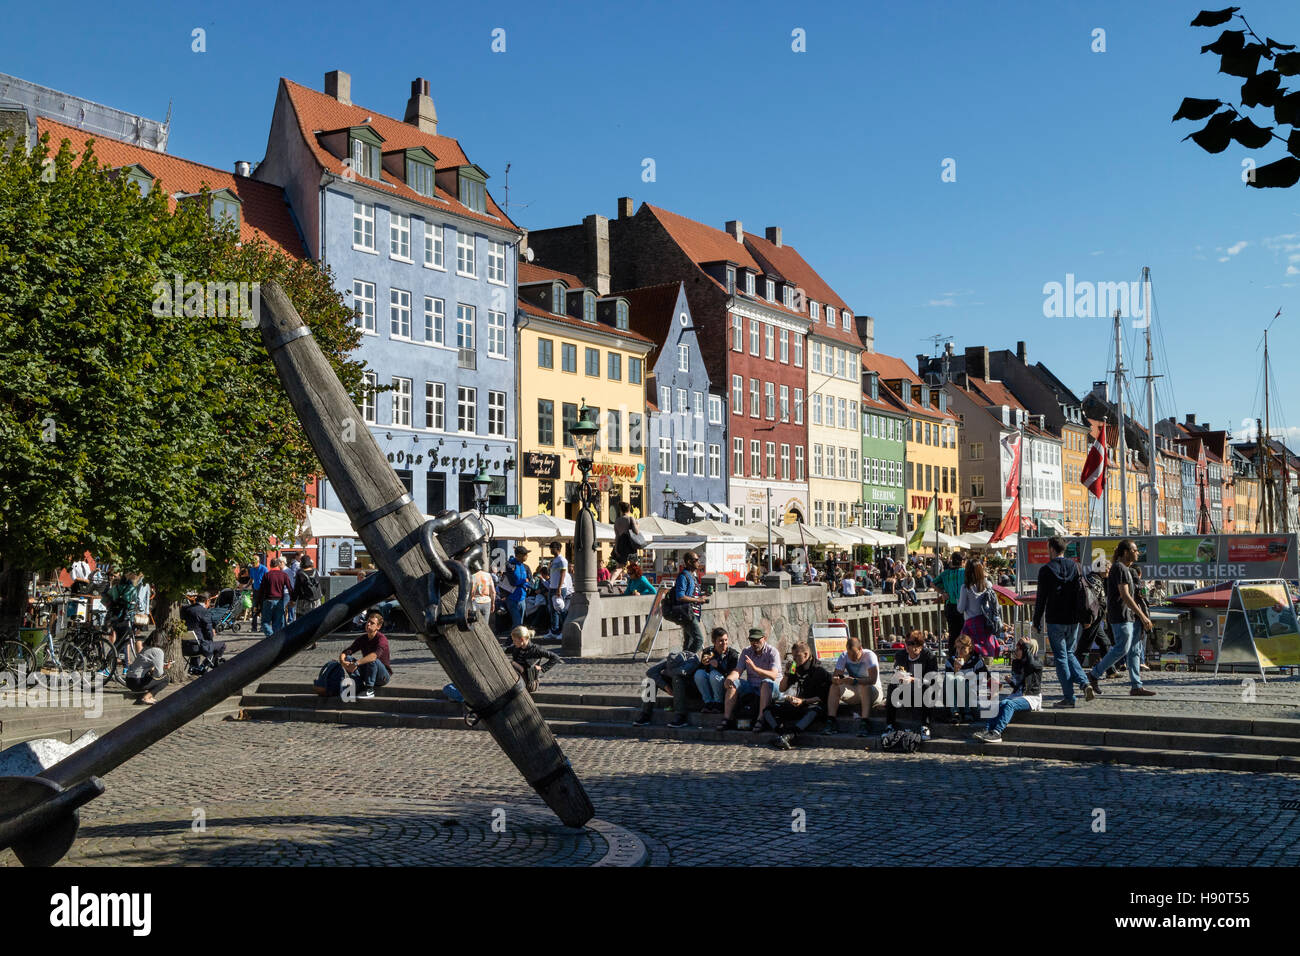 Historical and colorful Nyhavn Canal in Copenhagen, Denmark Stock Photo